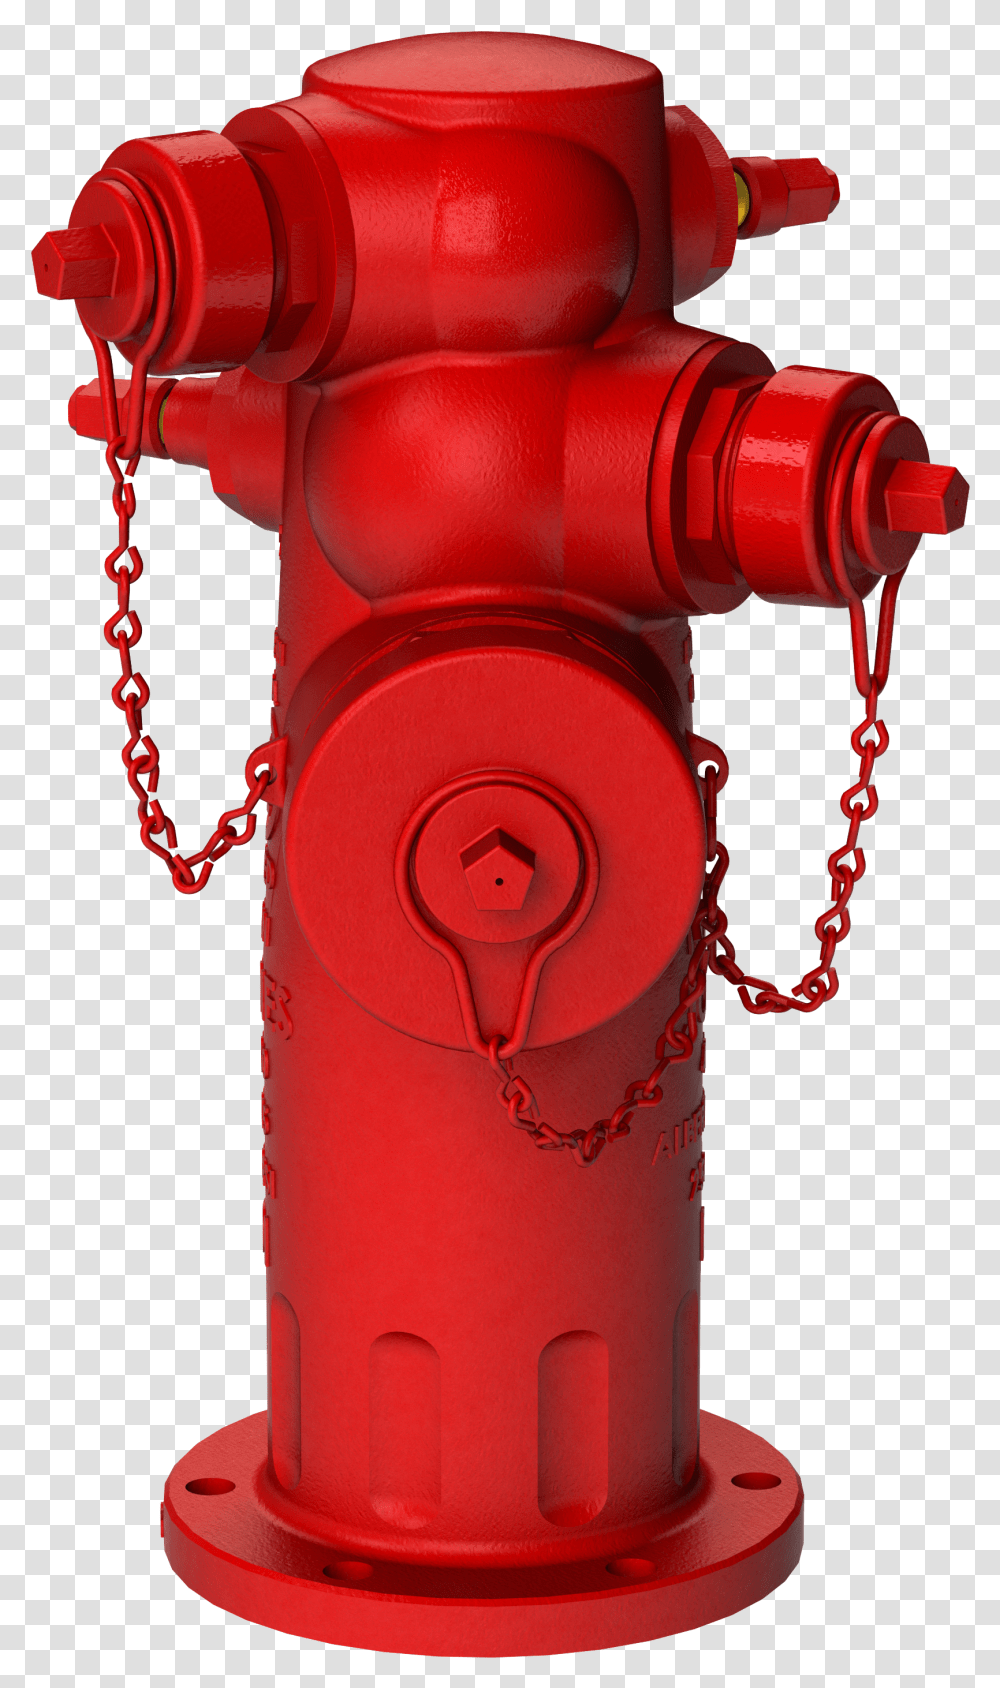 Hydrant Hd Hdpng Images Pluspng Fire Hydrant Transparent Png